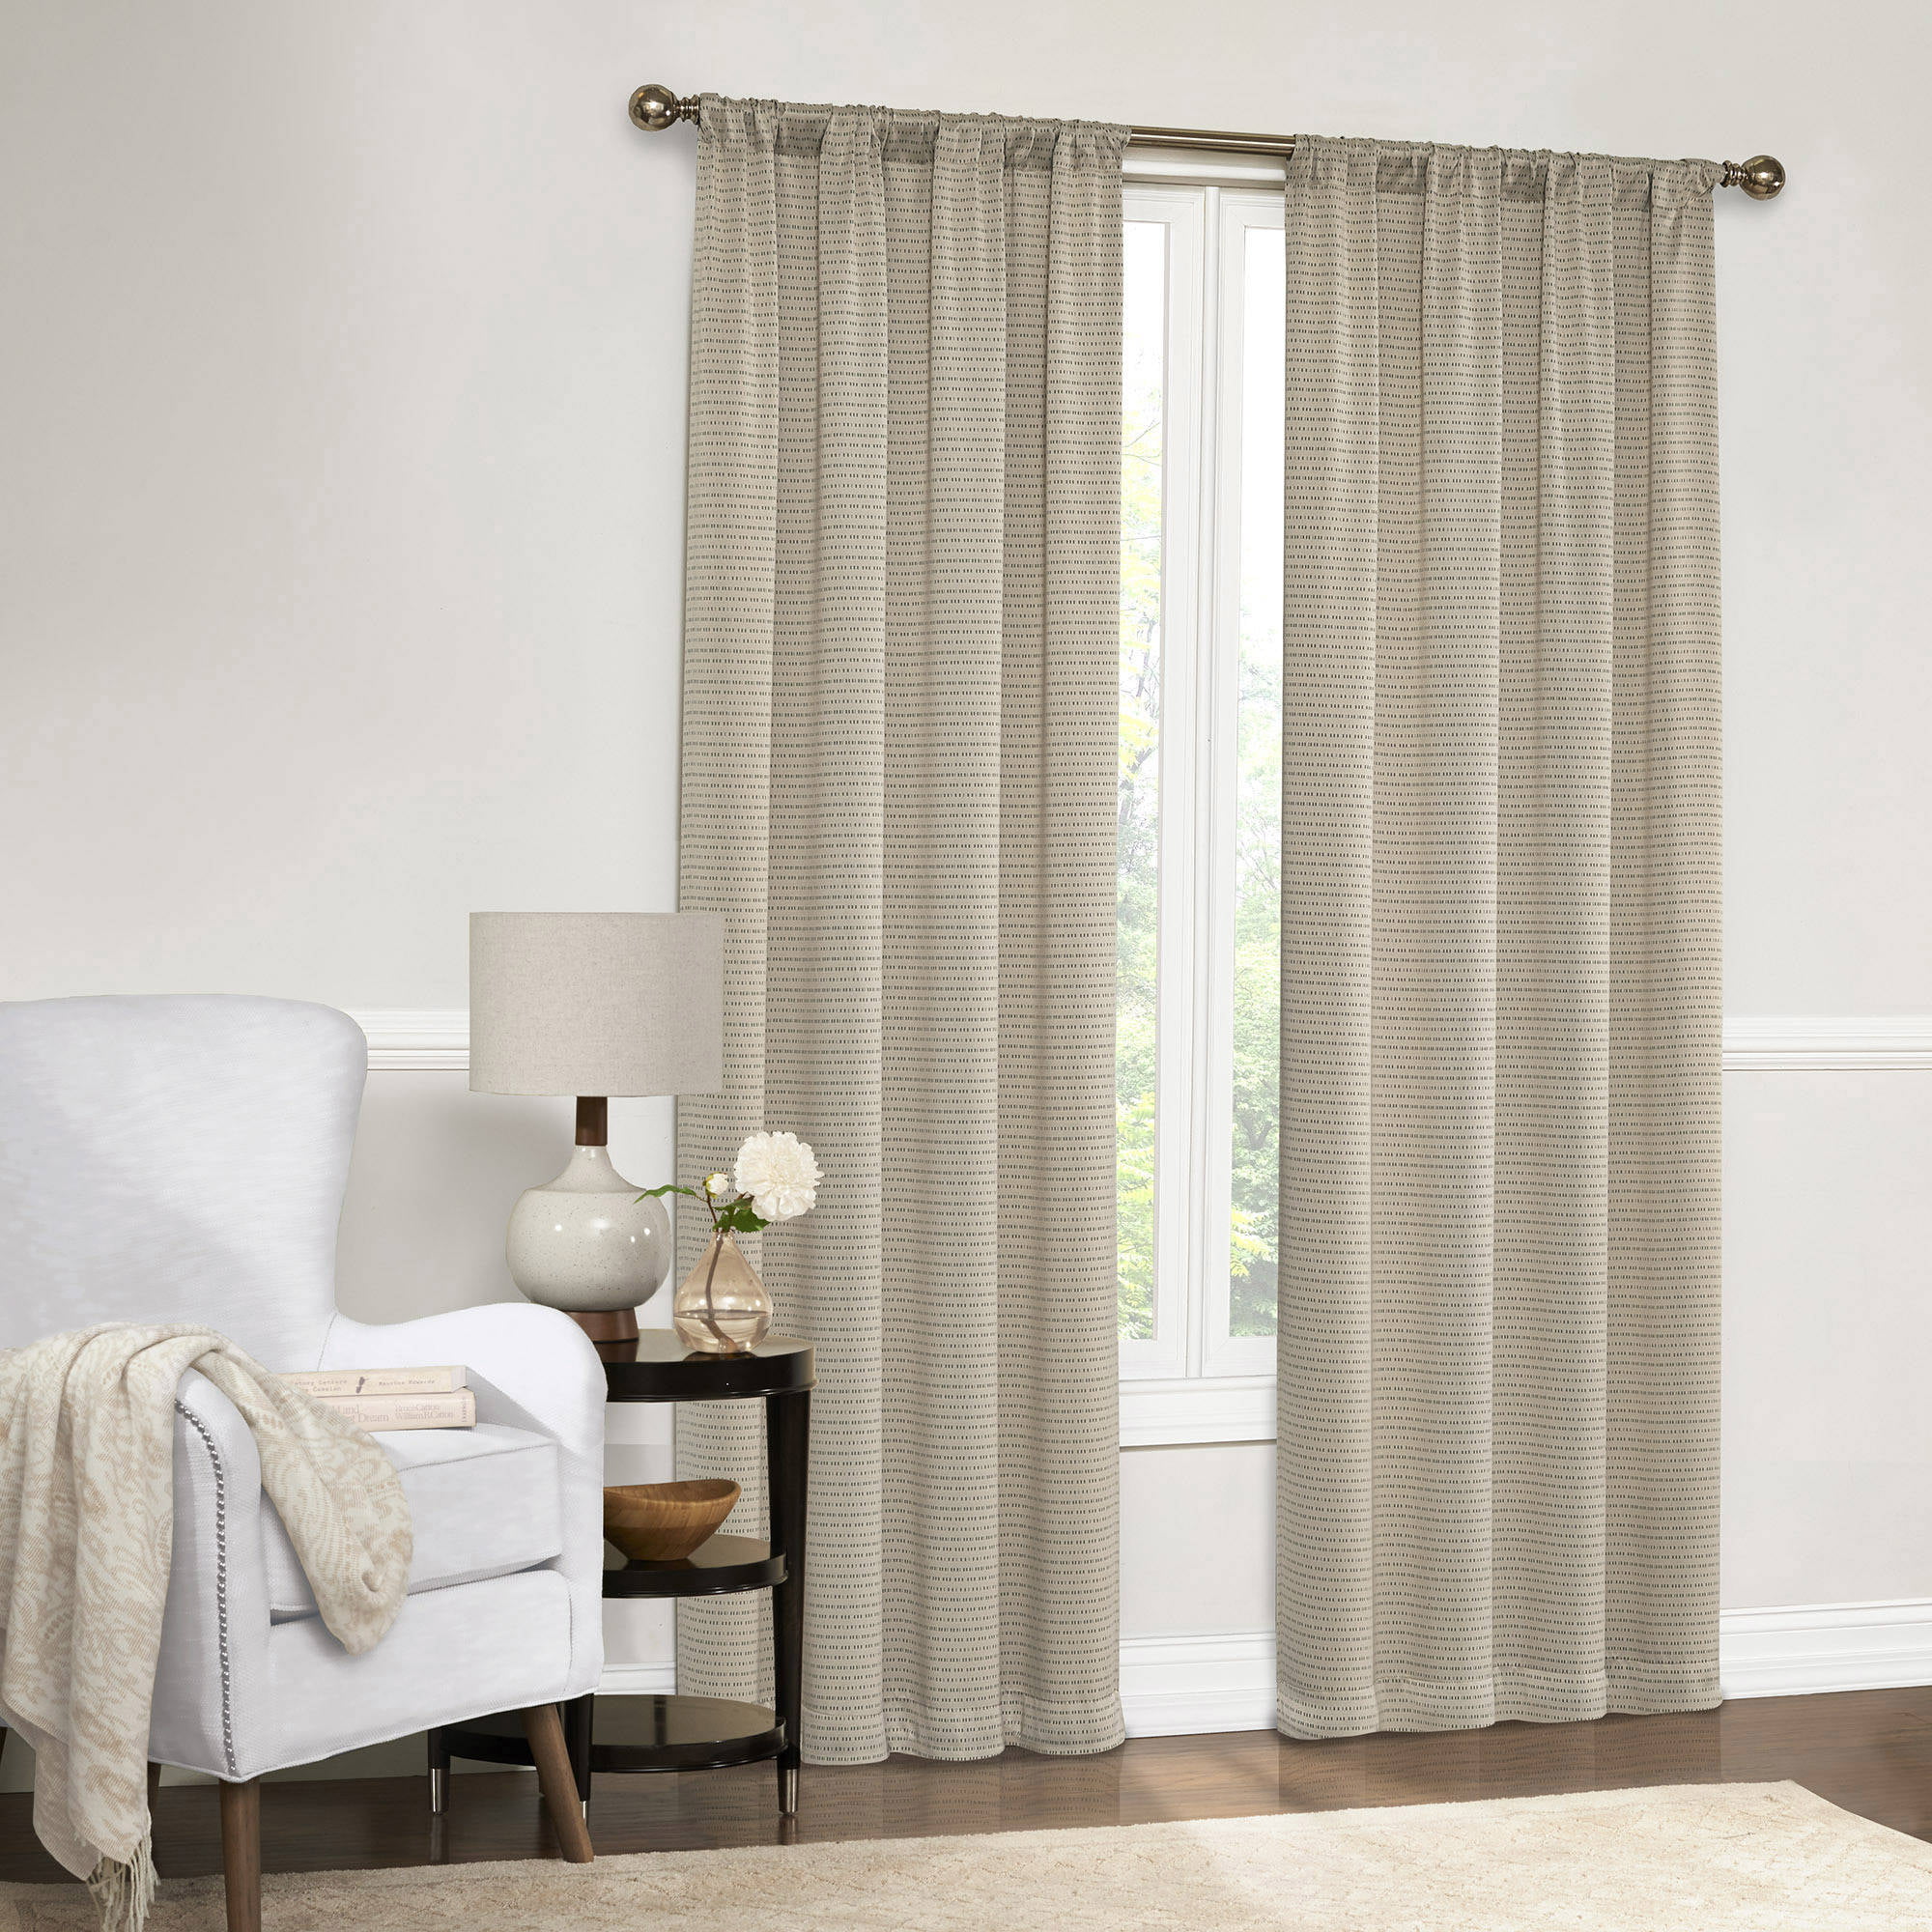 Mainstays Dotted Room Darkening Curtain Panel in Multiple Sizes